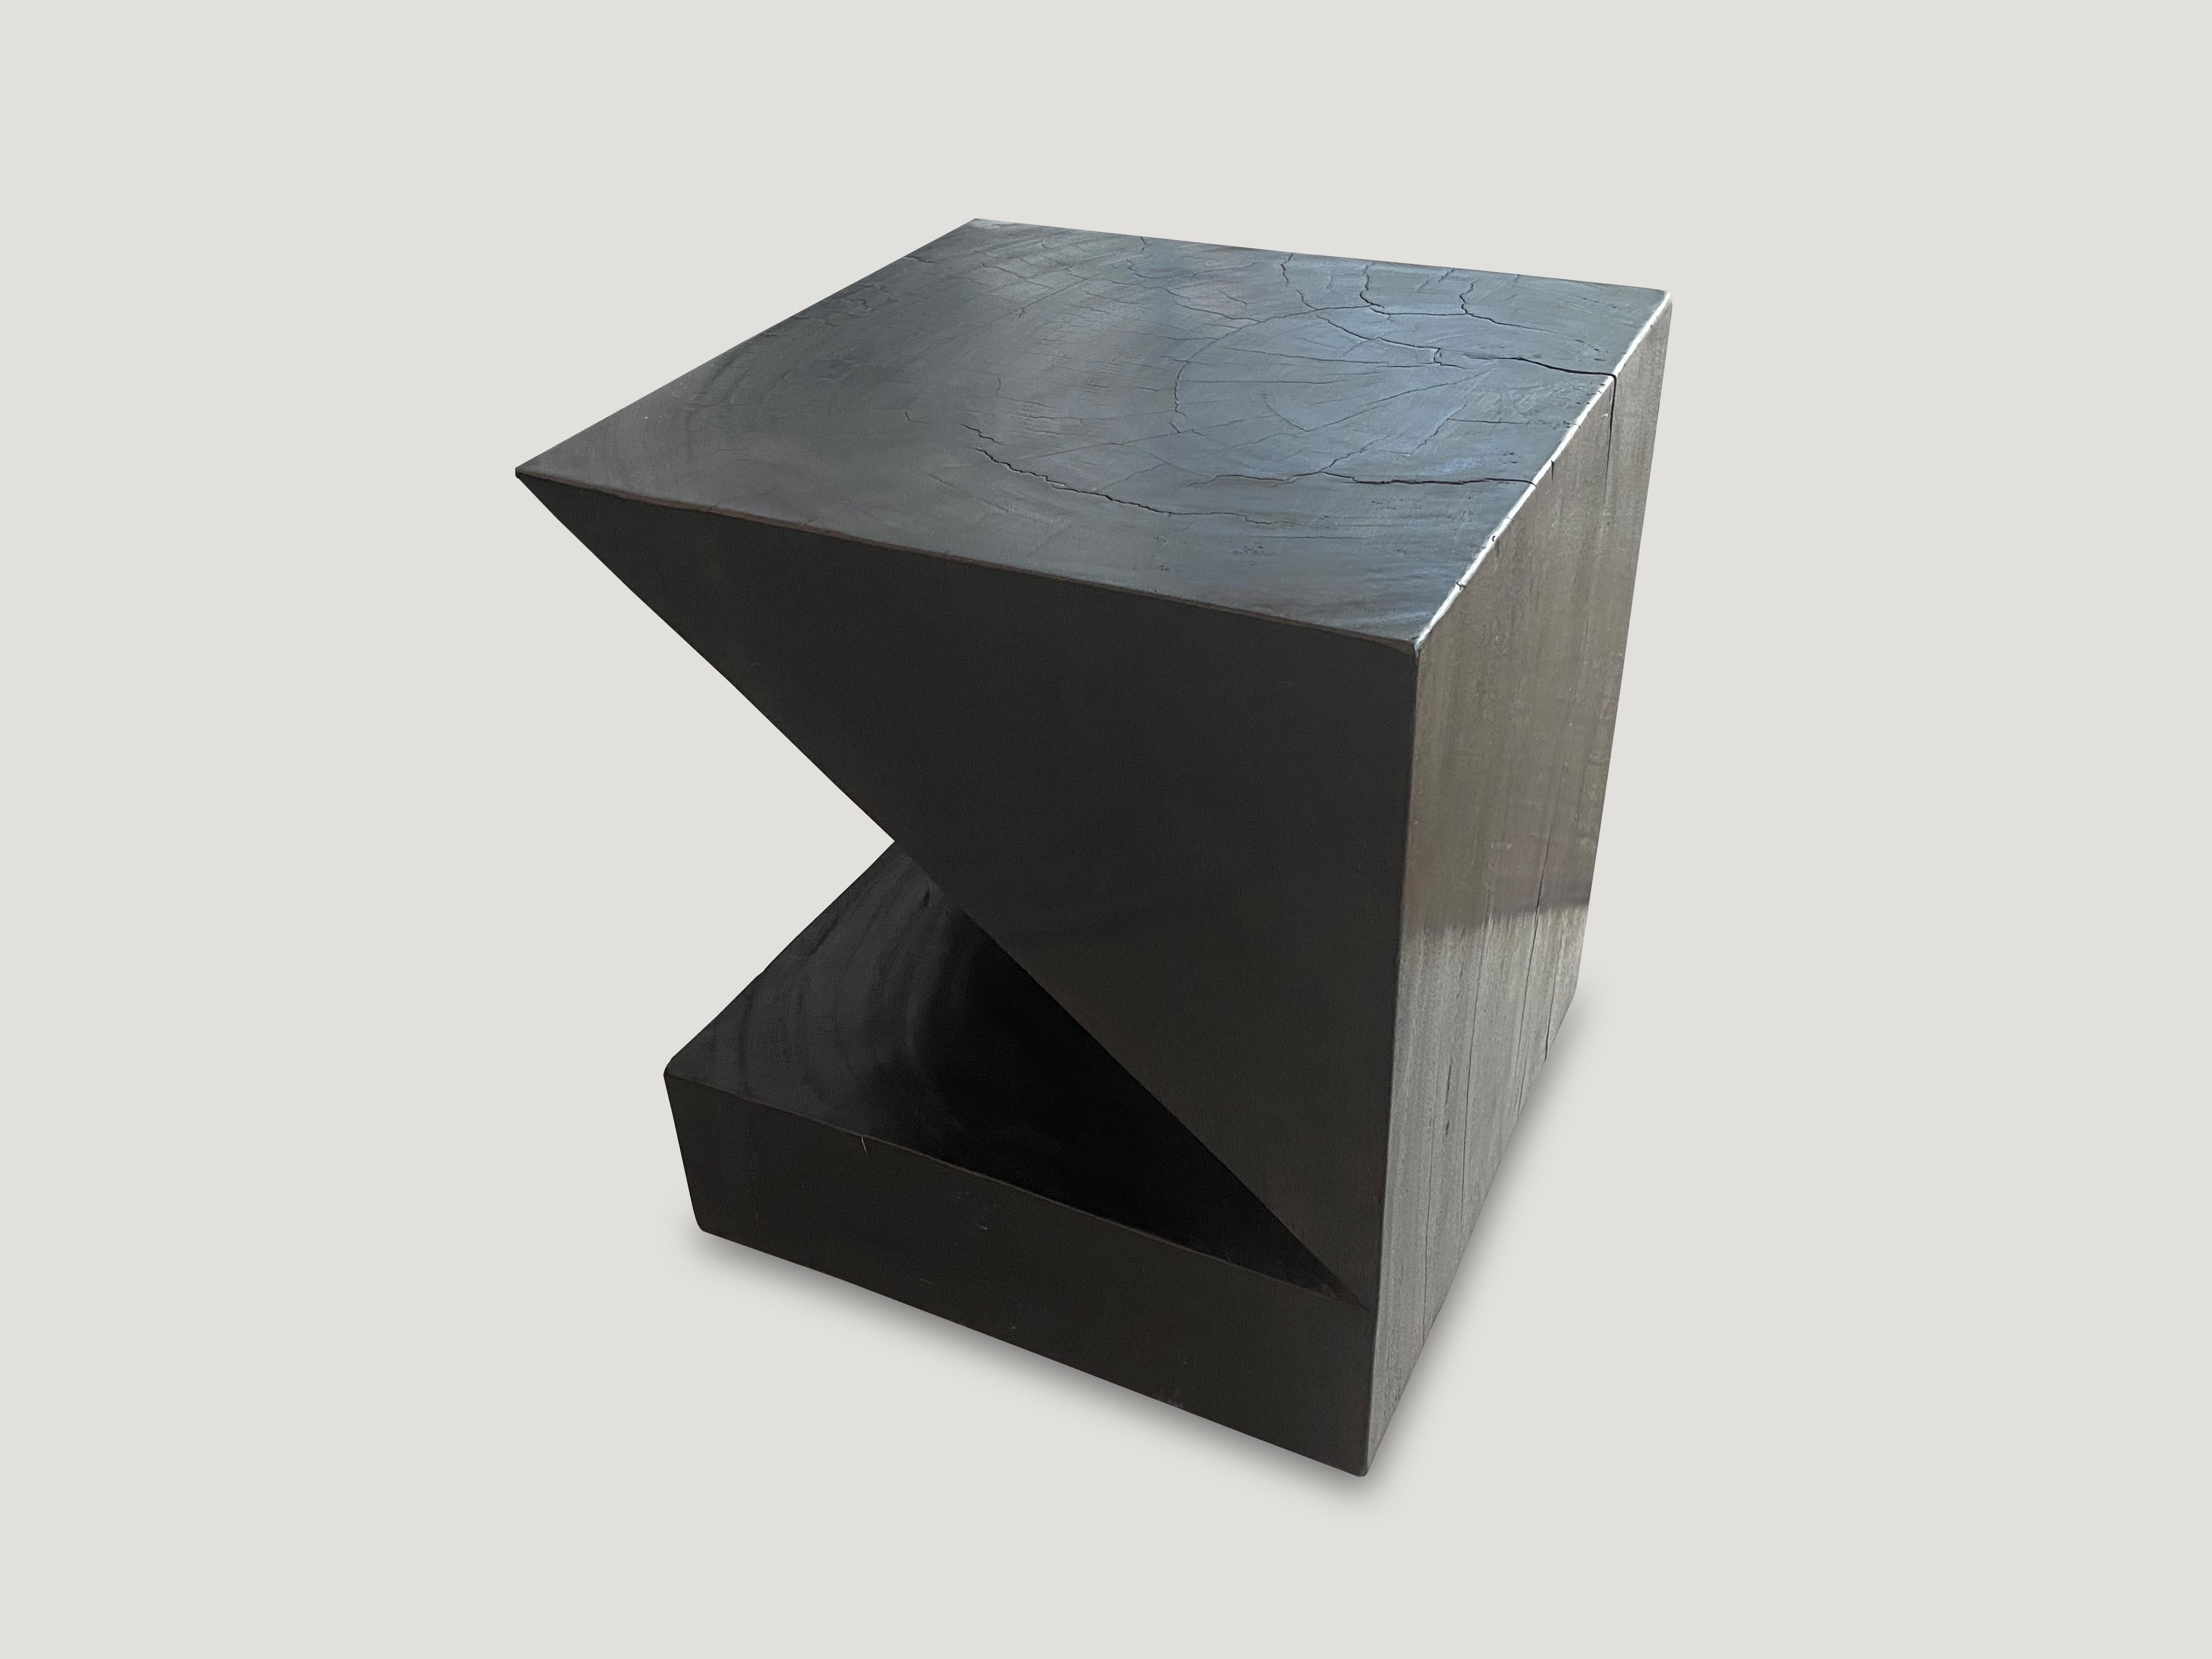 Solid reclaimed suar wood side table. Burnt, sanded and sealed. Inspired by the art of paper folding which is often associated with Japanese culture. New to our collection for 2020. Sold out in this color however we have the natural suar which we